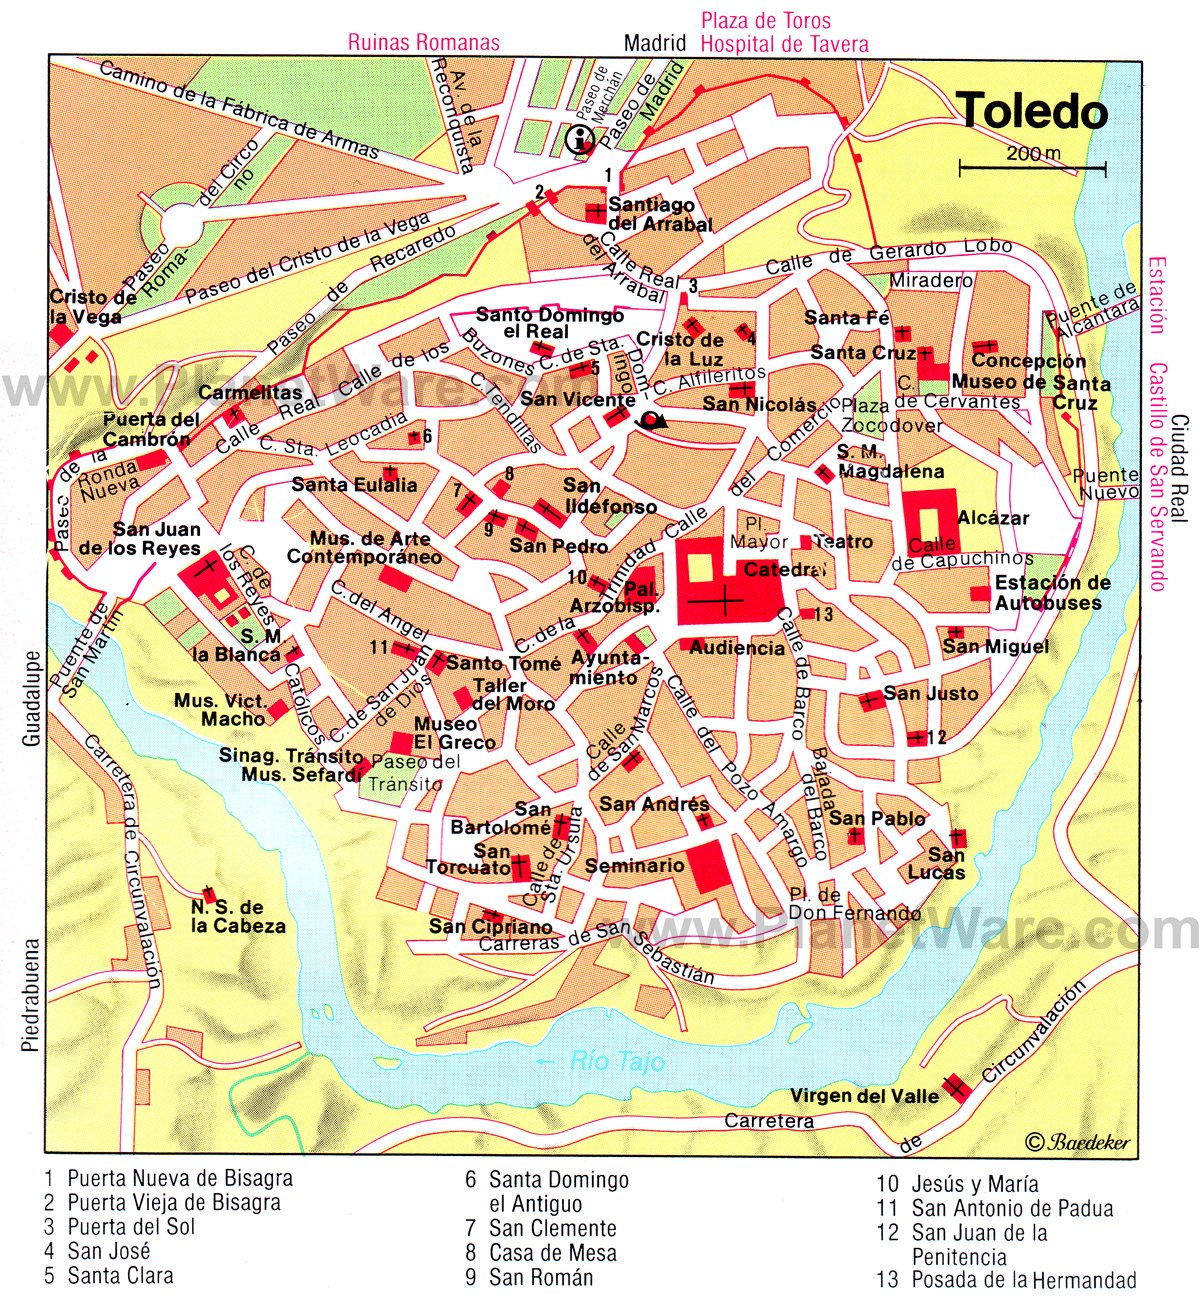 15 Top Tourist Attractions in Toledo & Easy Day Trips | PlanetWare